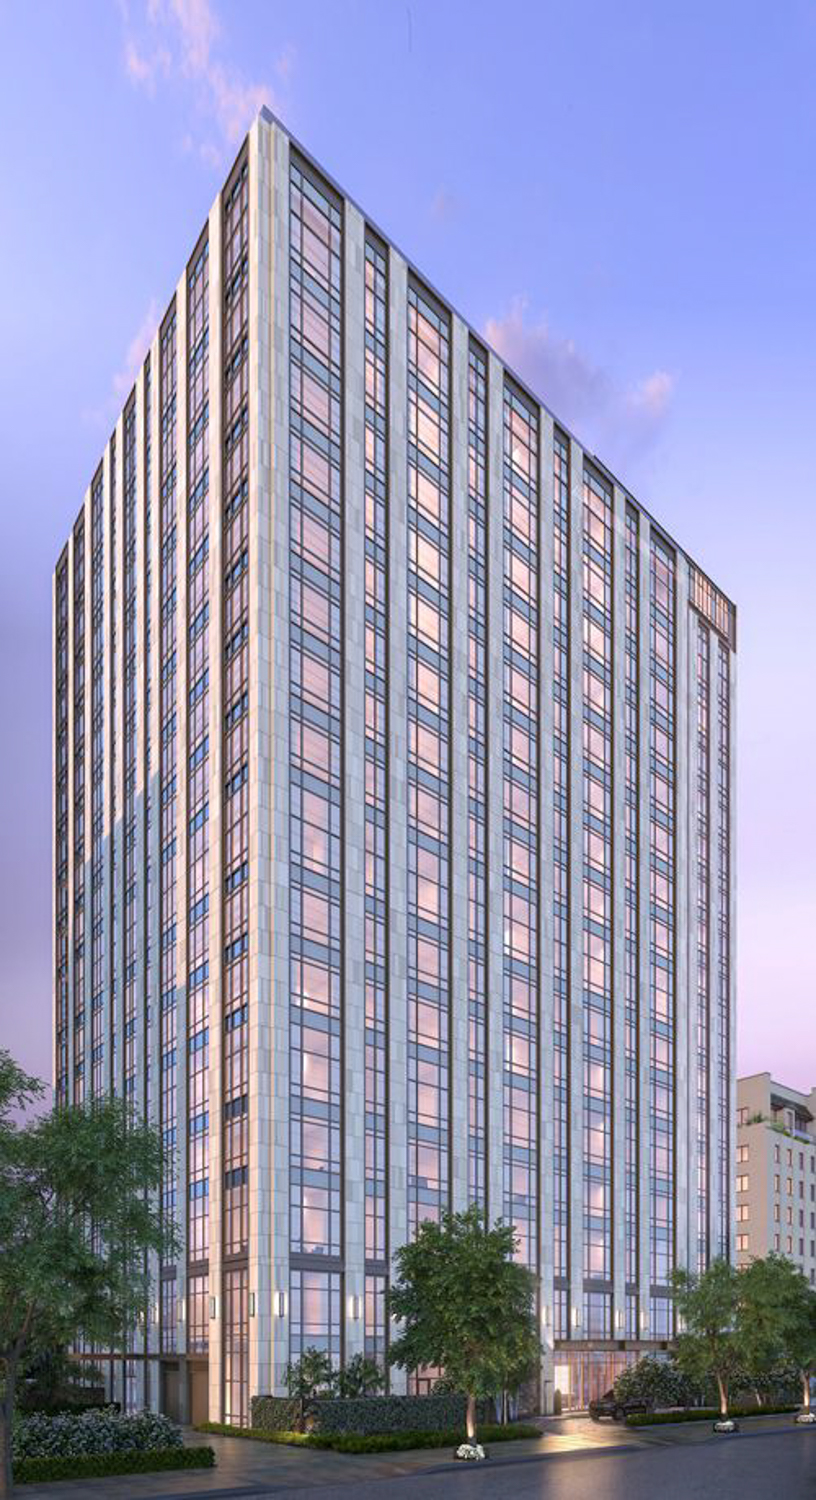 Gramercy Square, 215 East 19th Street, i.e. The Tower